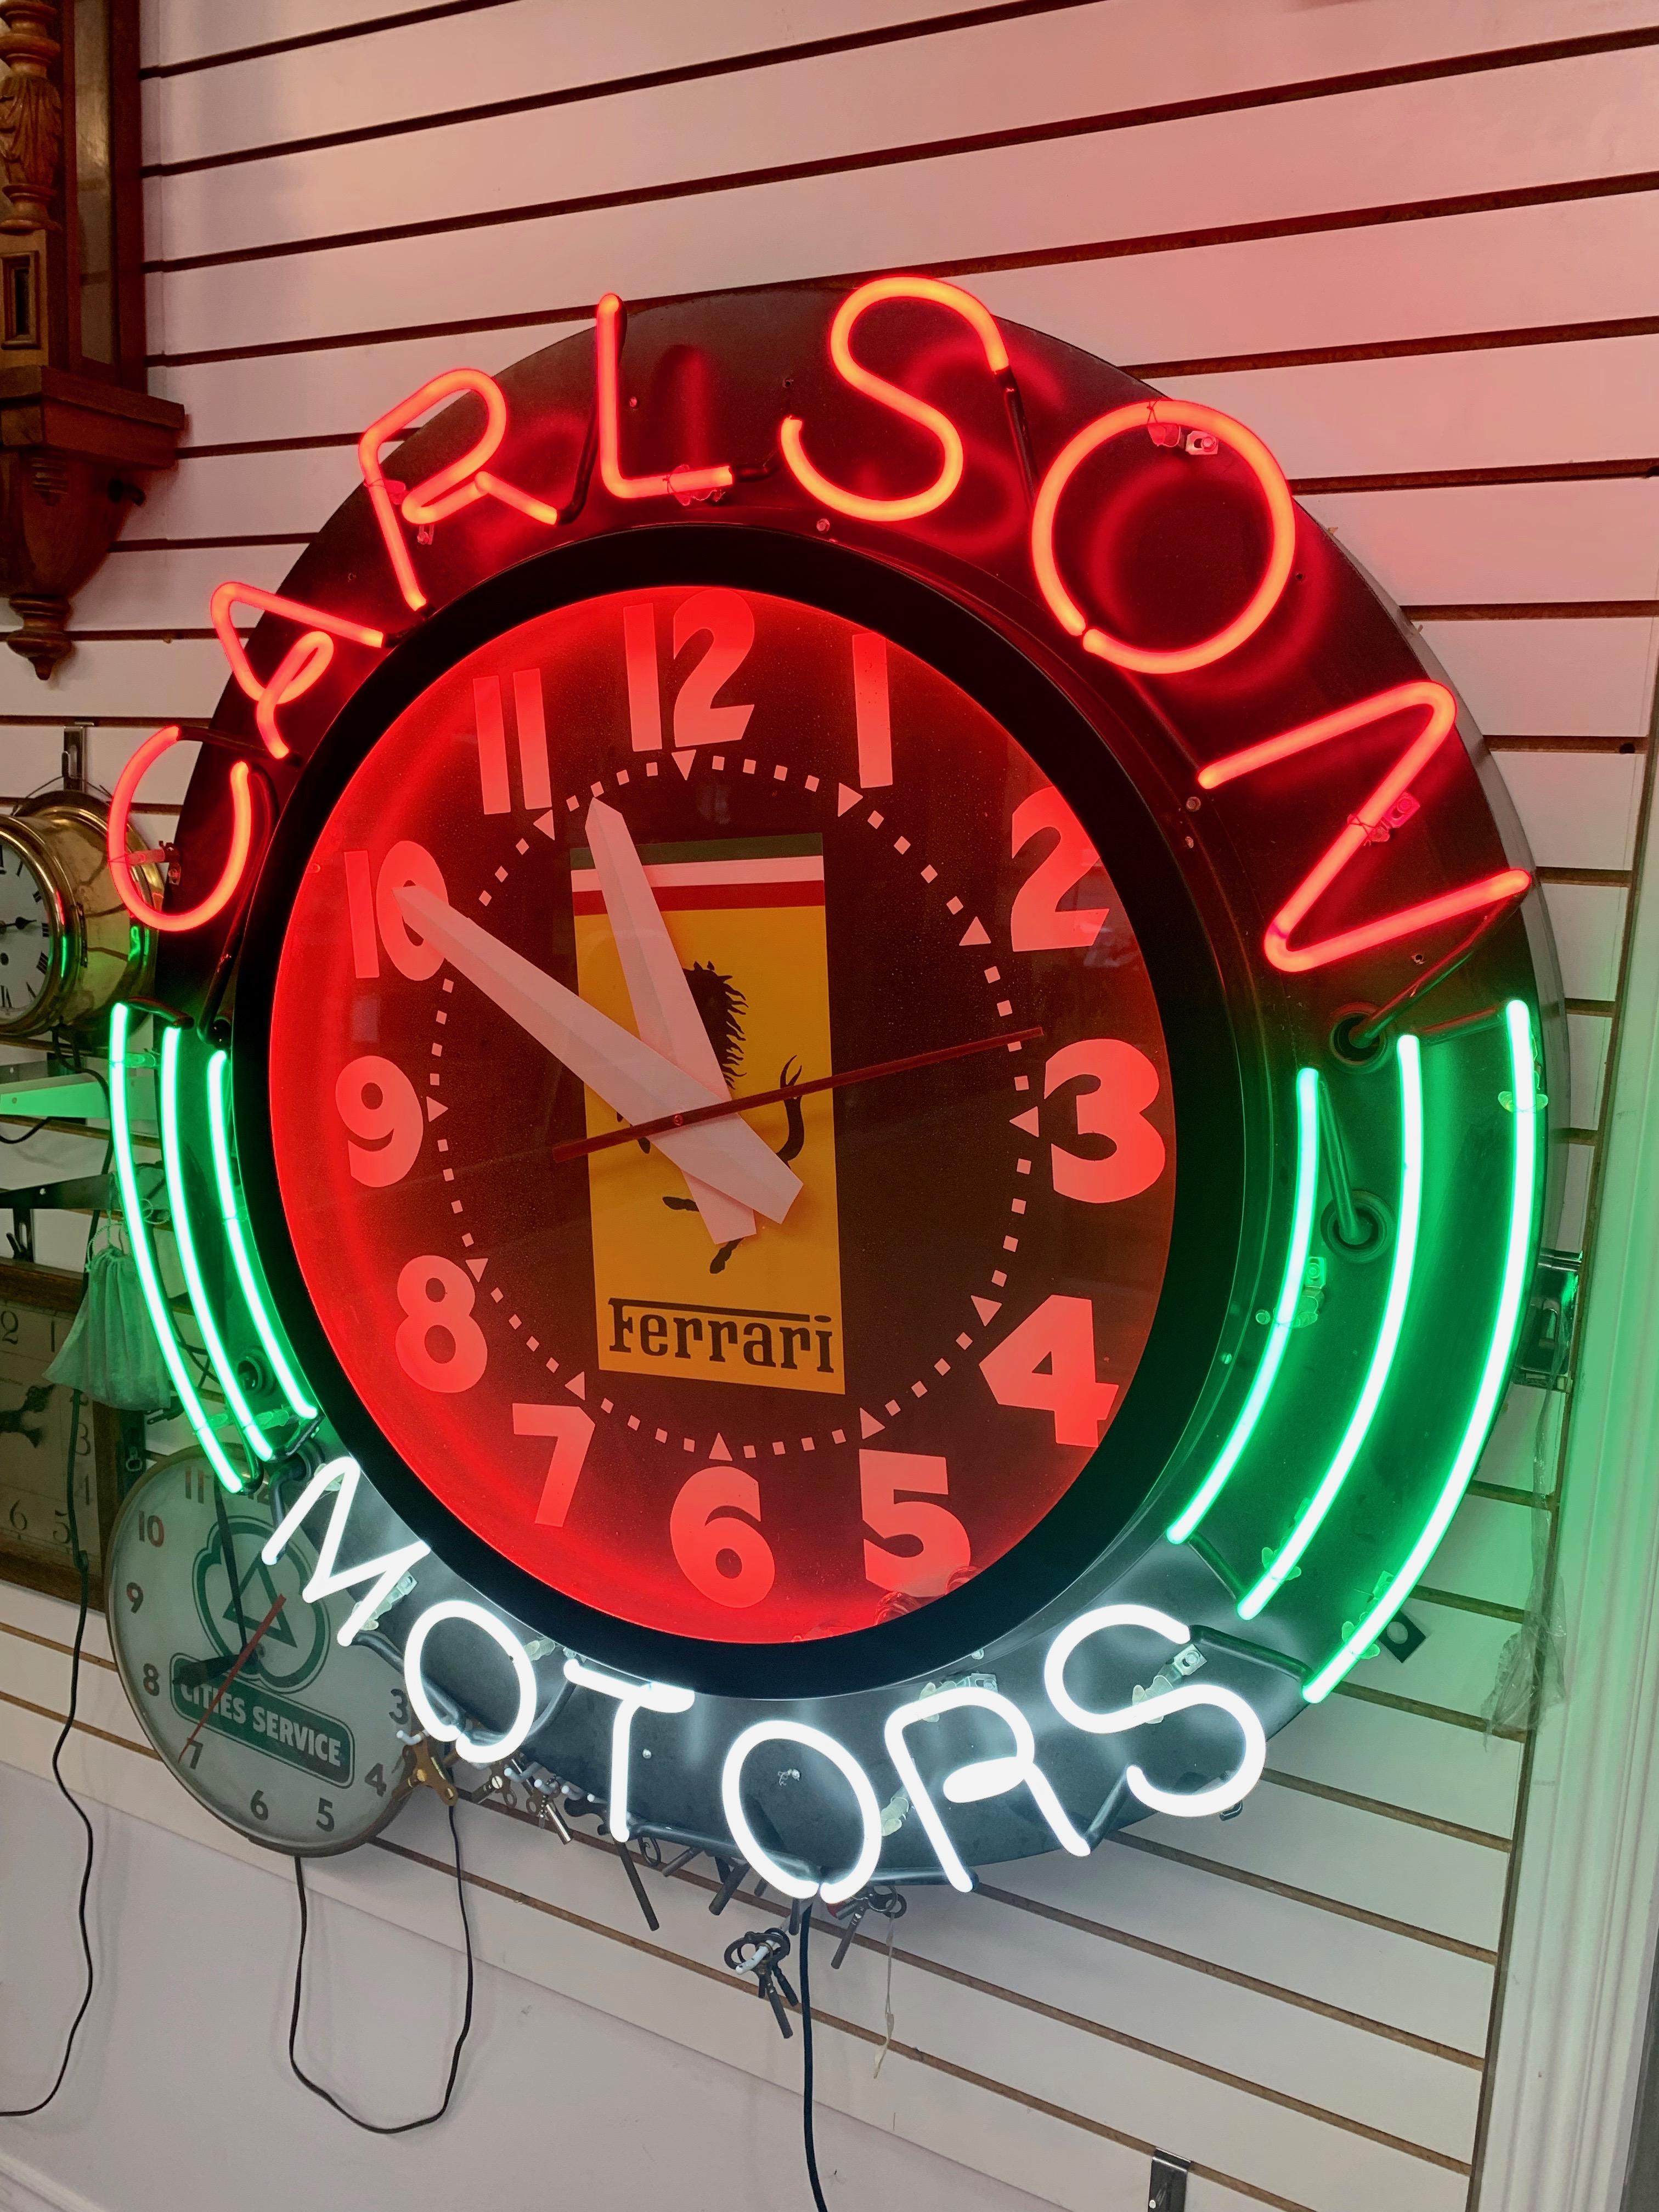 Large neon clock from a Southern California Ferrari dealership. Great colors, excellent condition. Clock has been serviced and is in excellent working order. Great Ferrari advertising piece. Just over 3 feet in diameter.